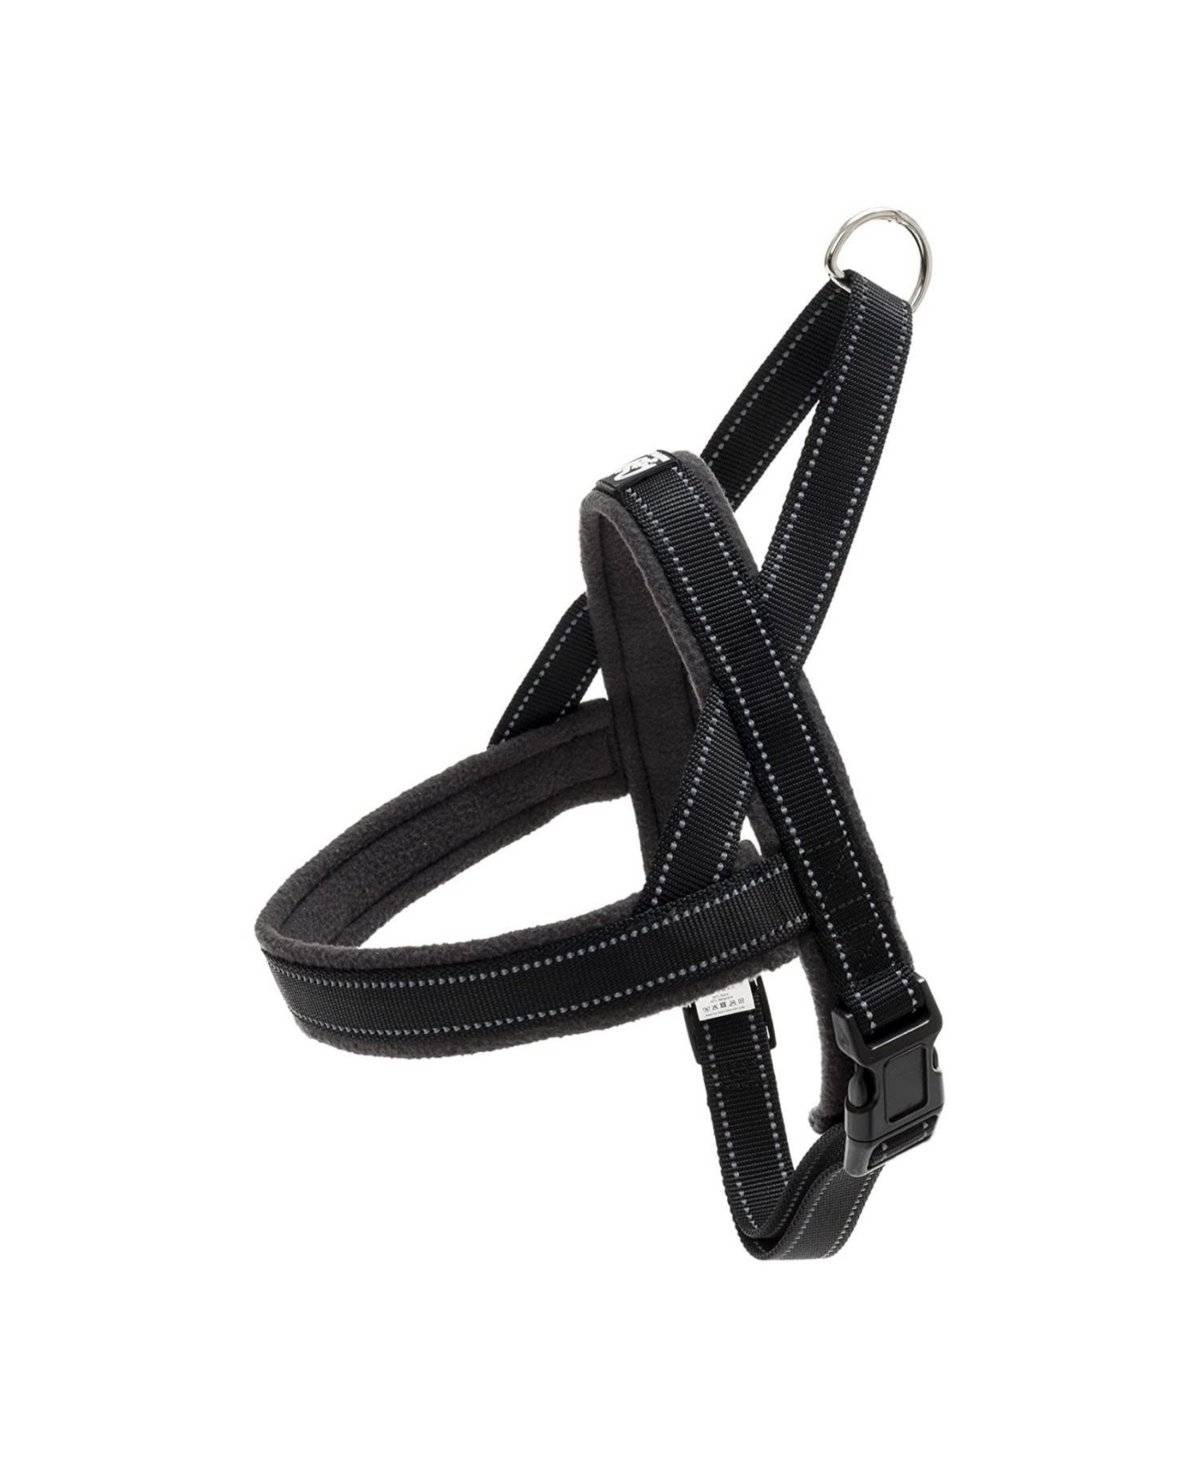 No Pull Dog Harness with Soft Padding and Reflective Material - Black